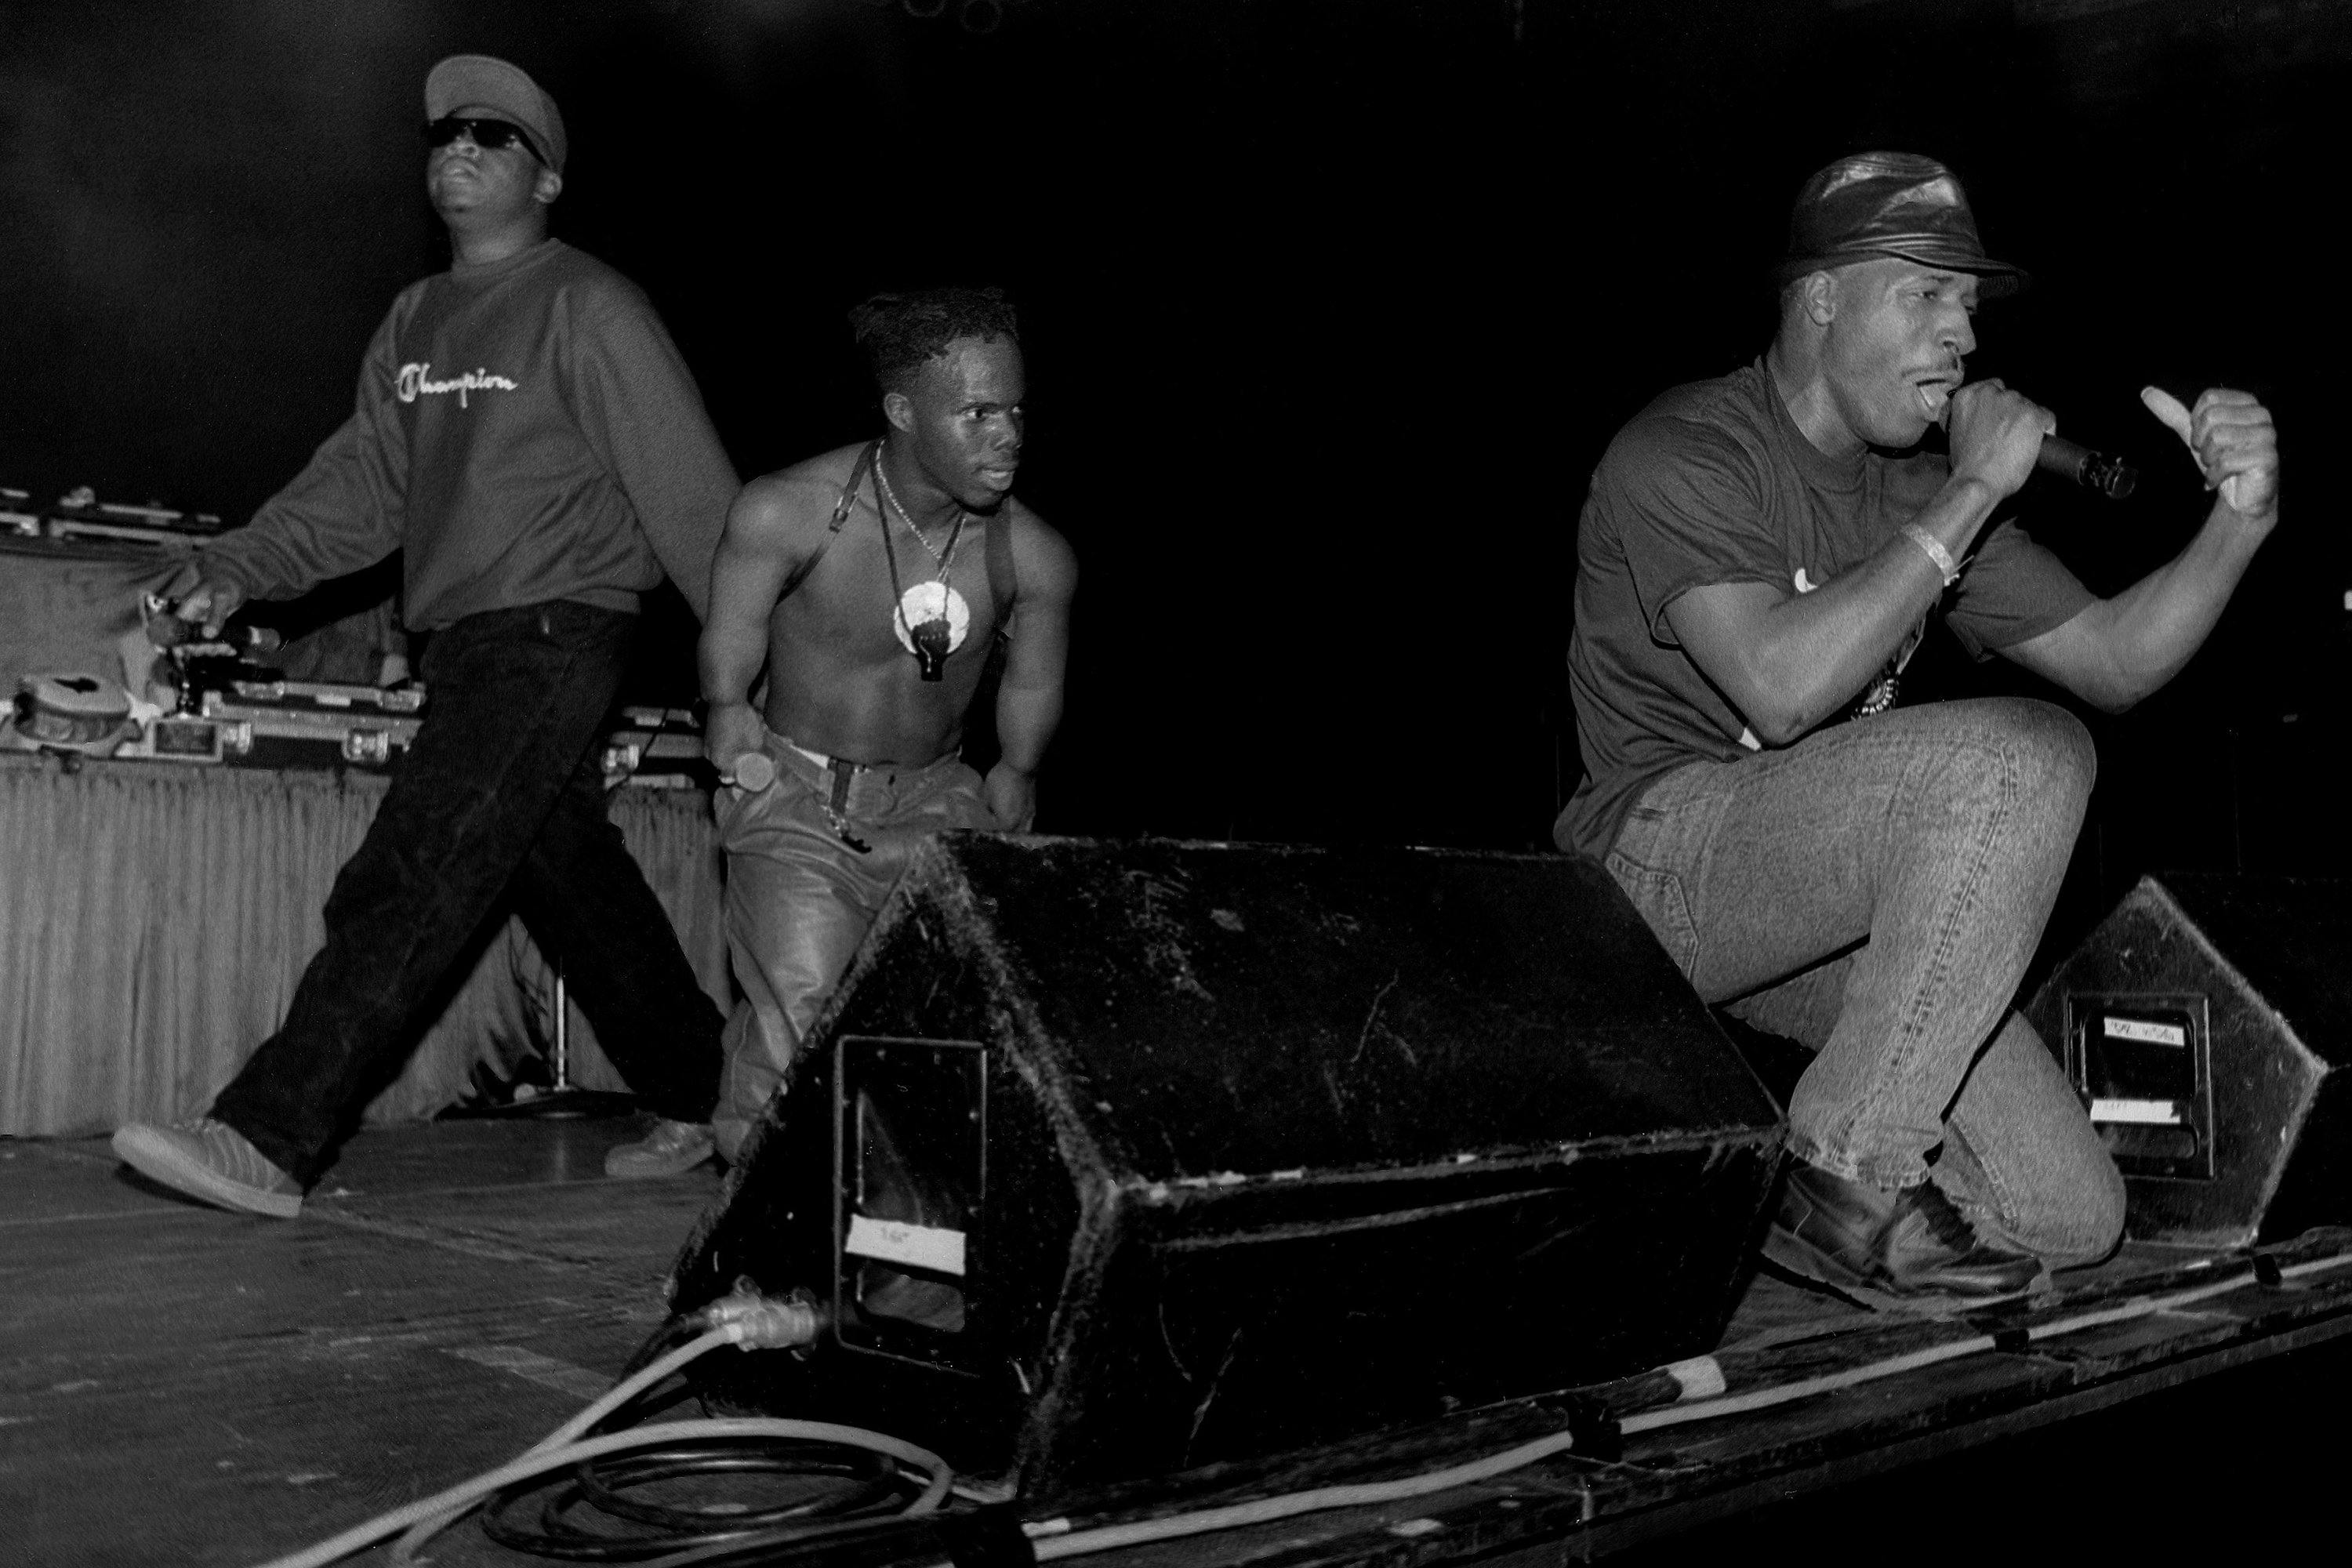 Scarface, Bushwick Bill and Willie D of The Geto Boys